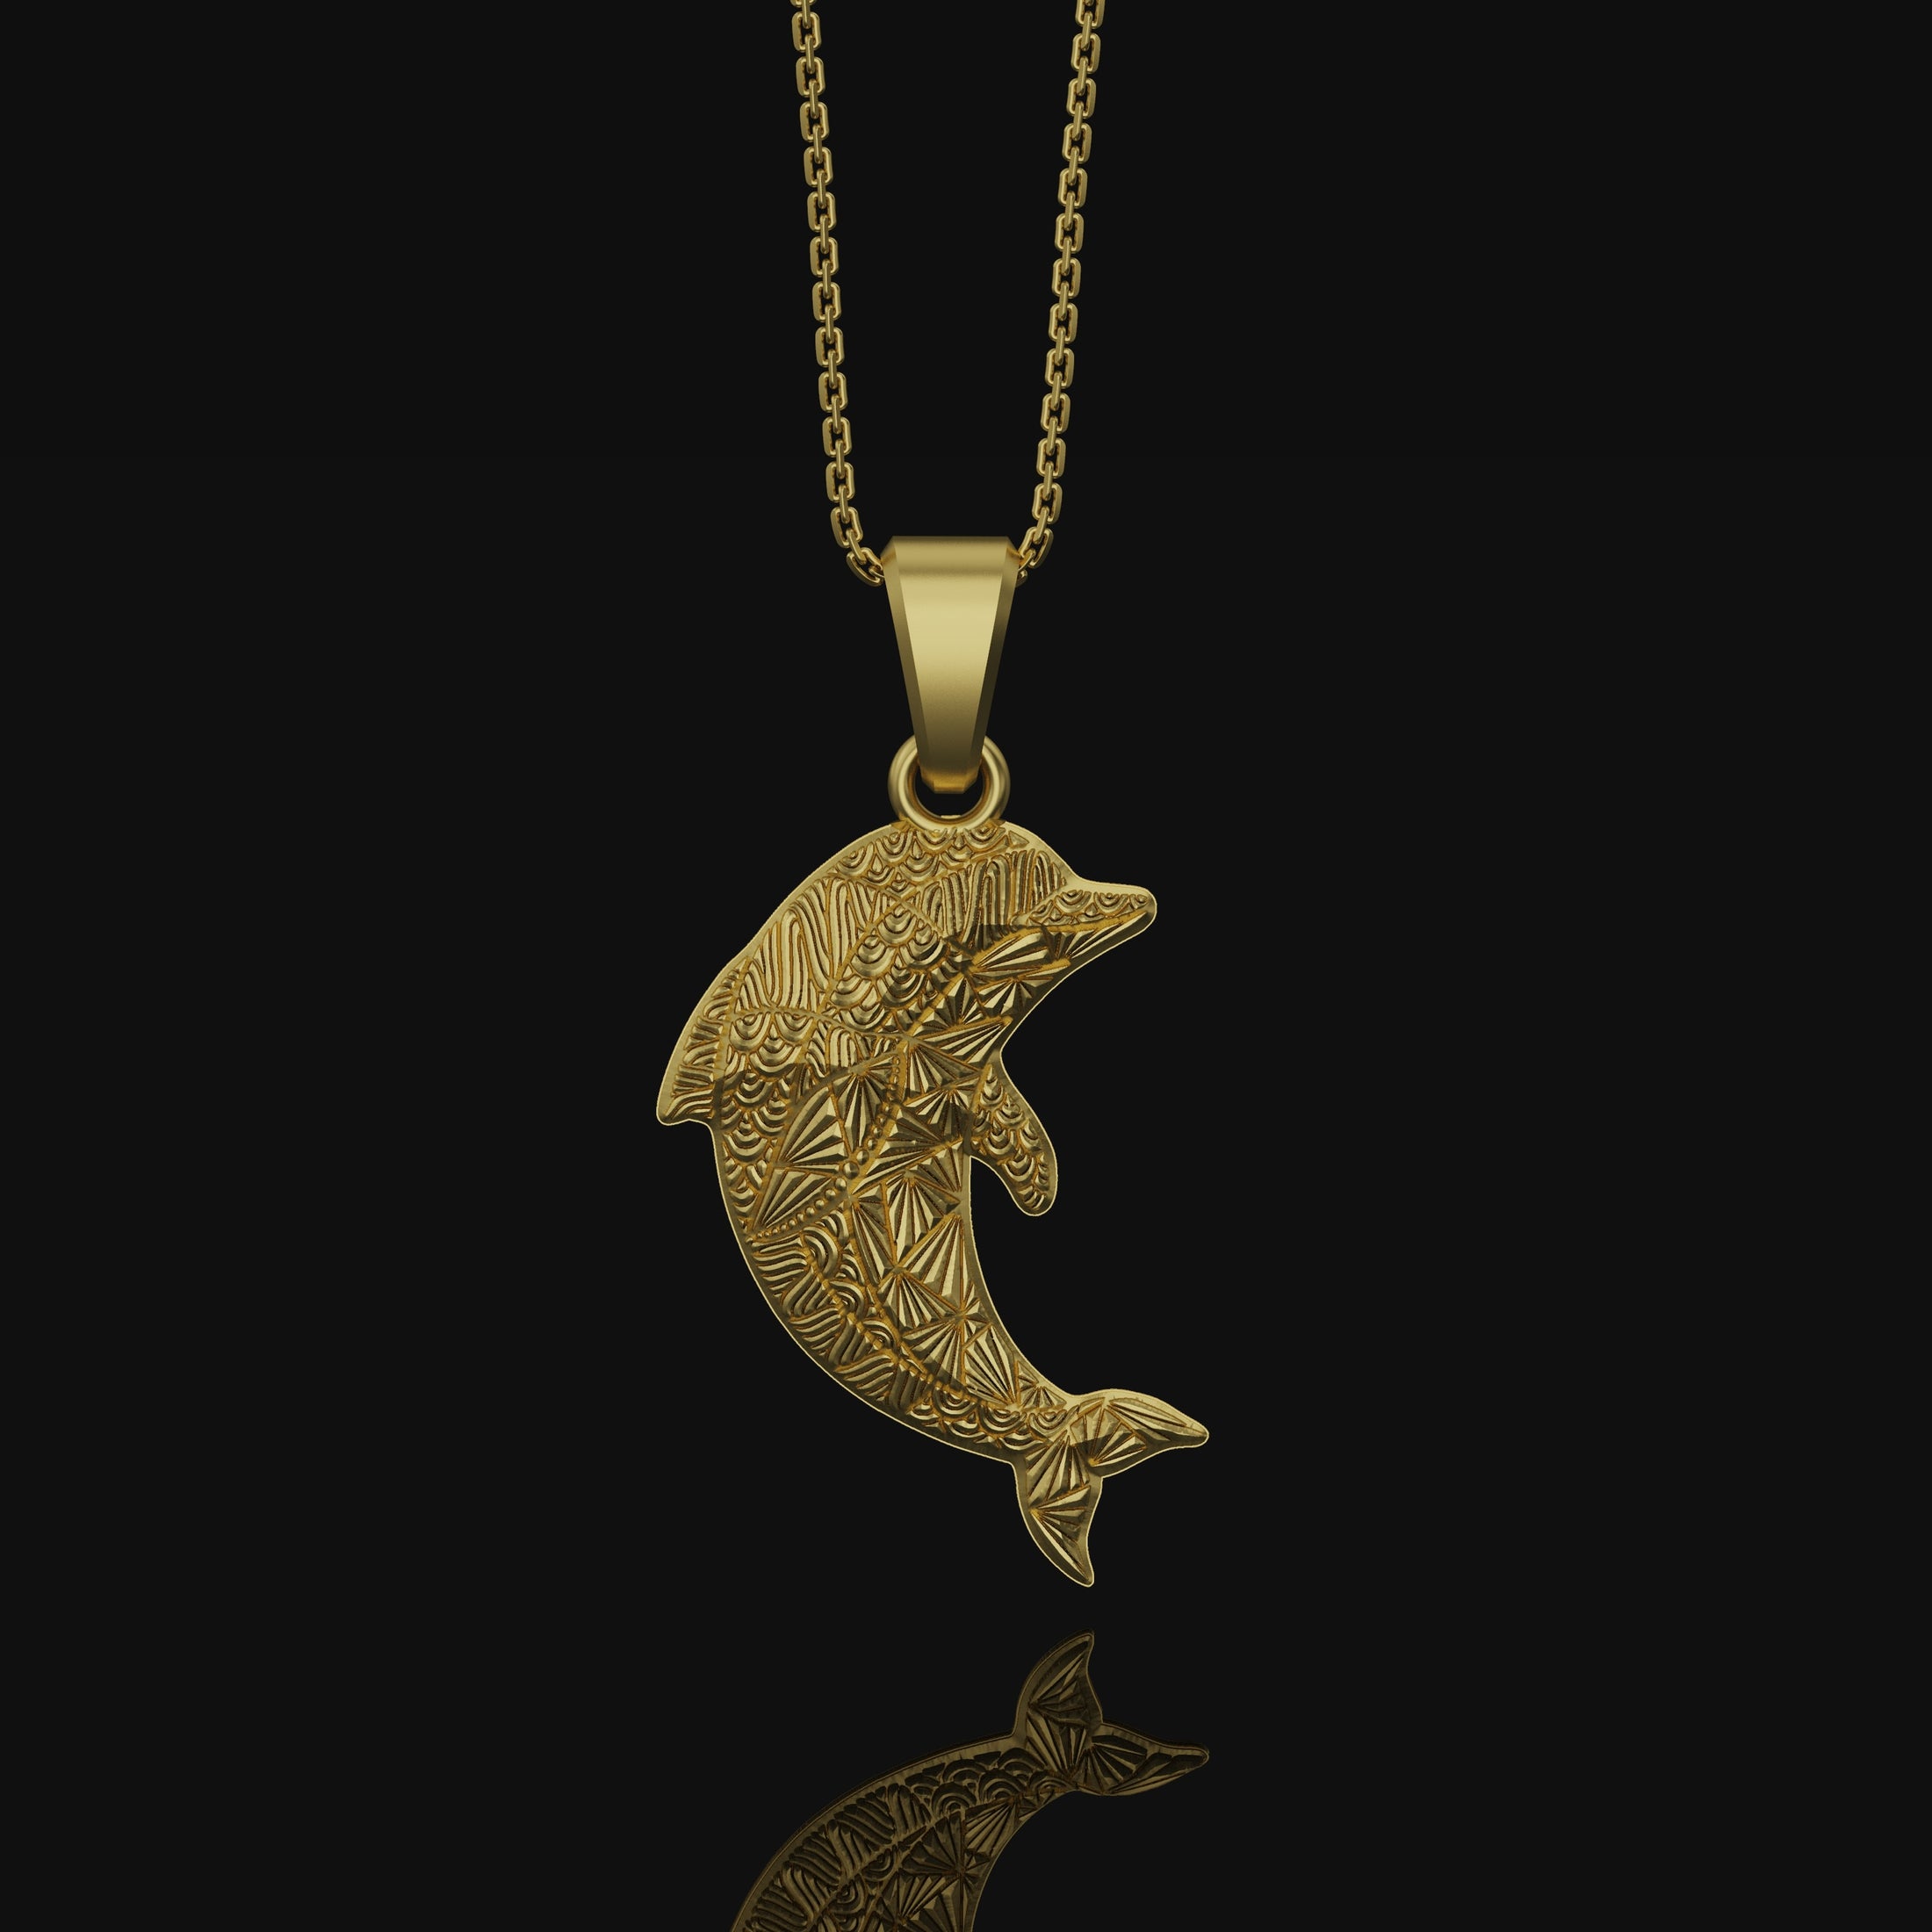 Dolphin Necklace, Silver